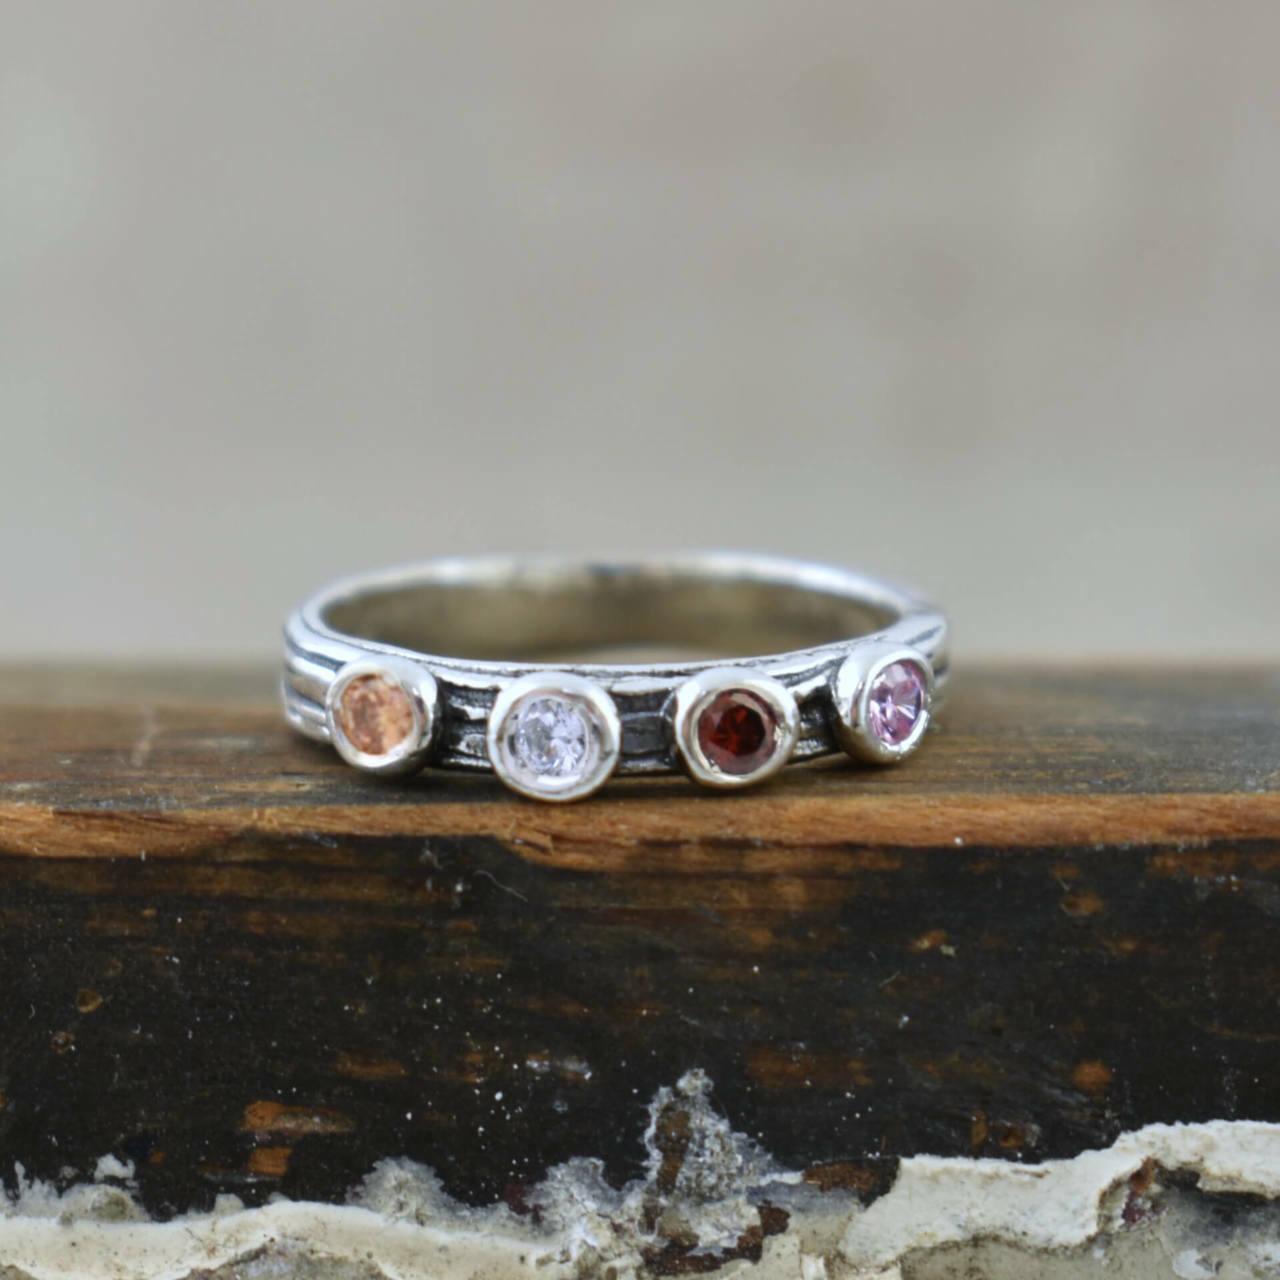 Handcrafted sterling silver and CZ birthstone ring